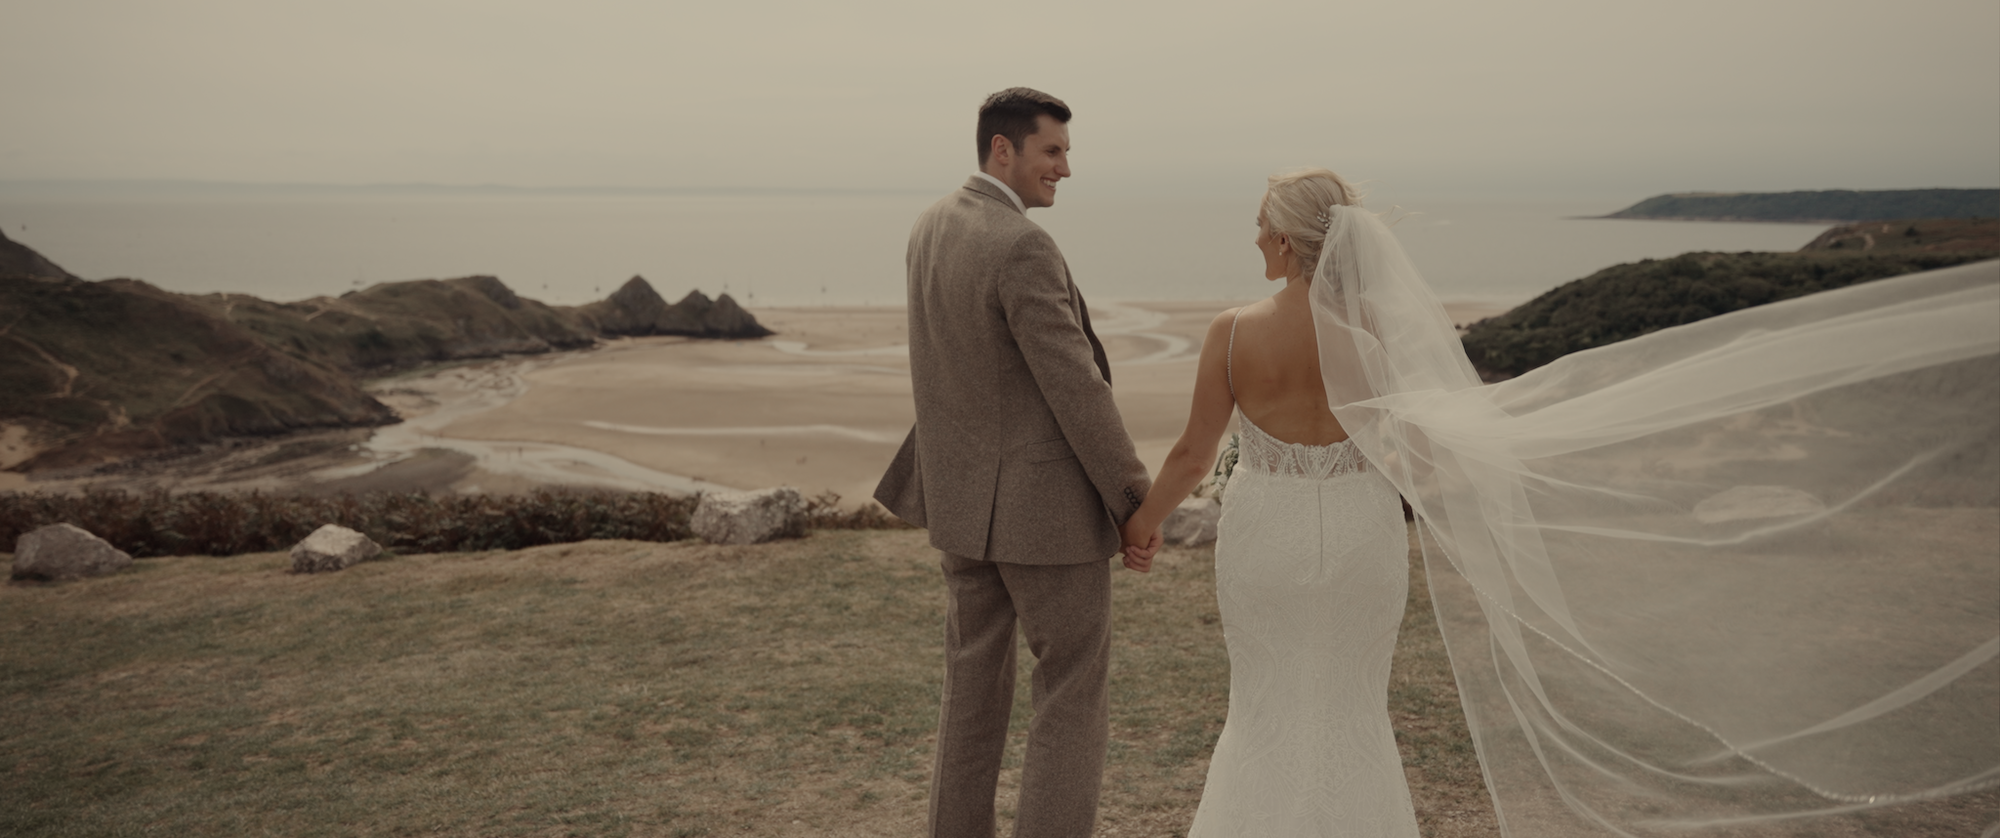 Oxwich Bay Hotel Wedding Videography by Ben Holbrook Films (Swansea South Wales).jpeg28.png